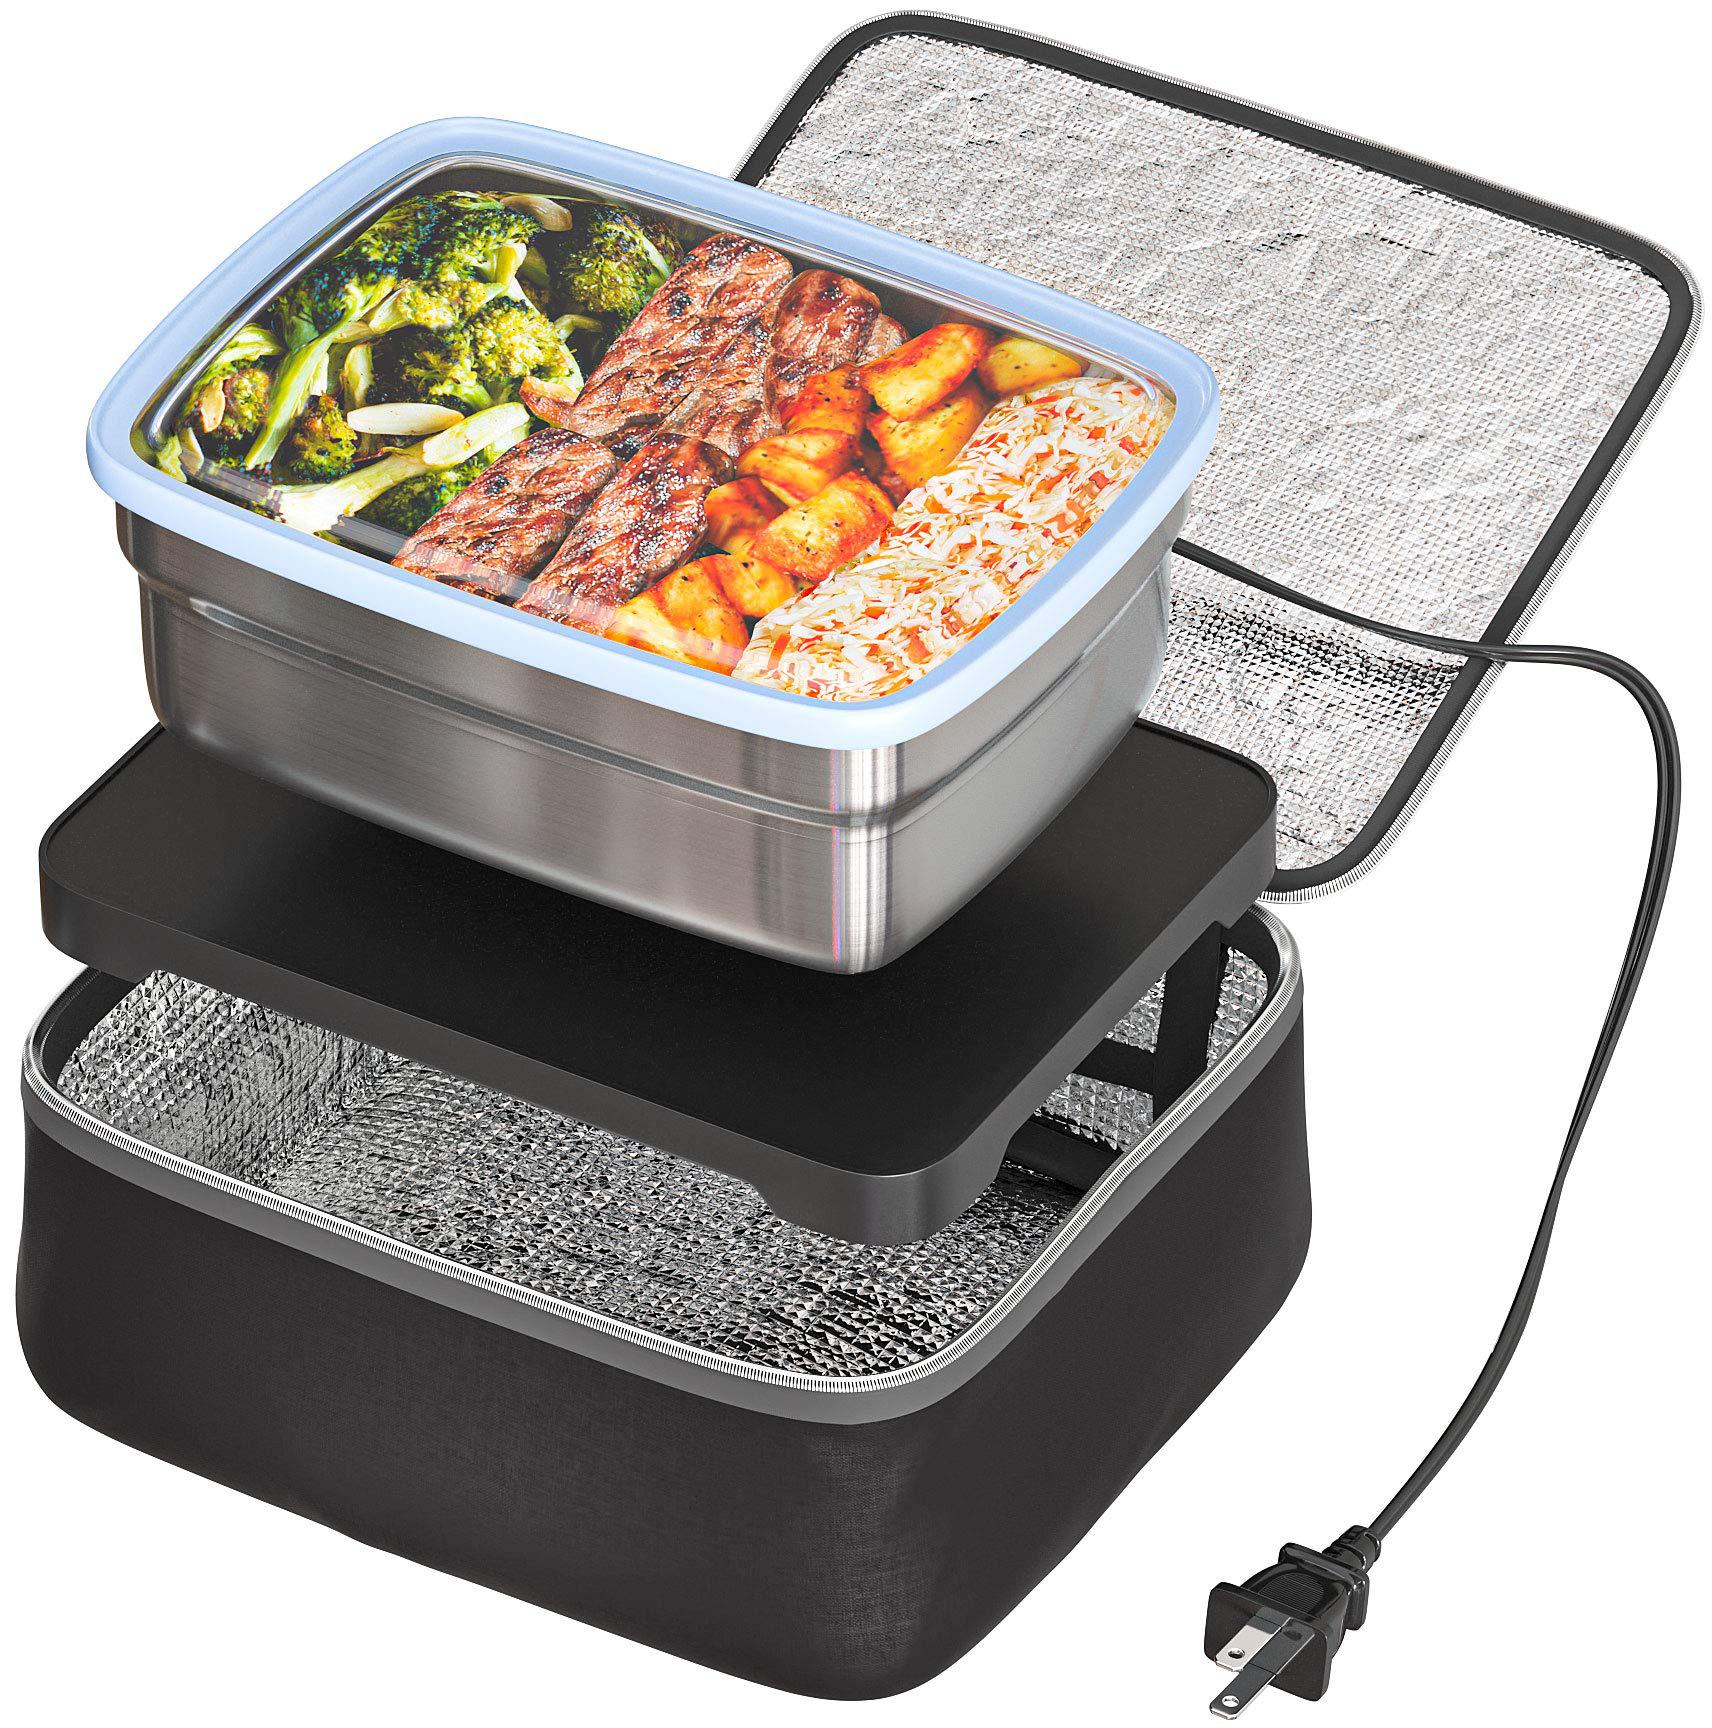 skywin portable oven and lunch warmer - personal food warmer for reheating meals at work without an office microwave